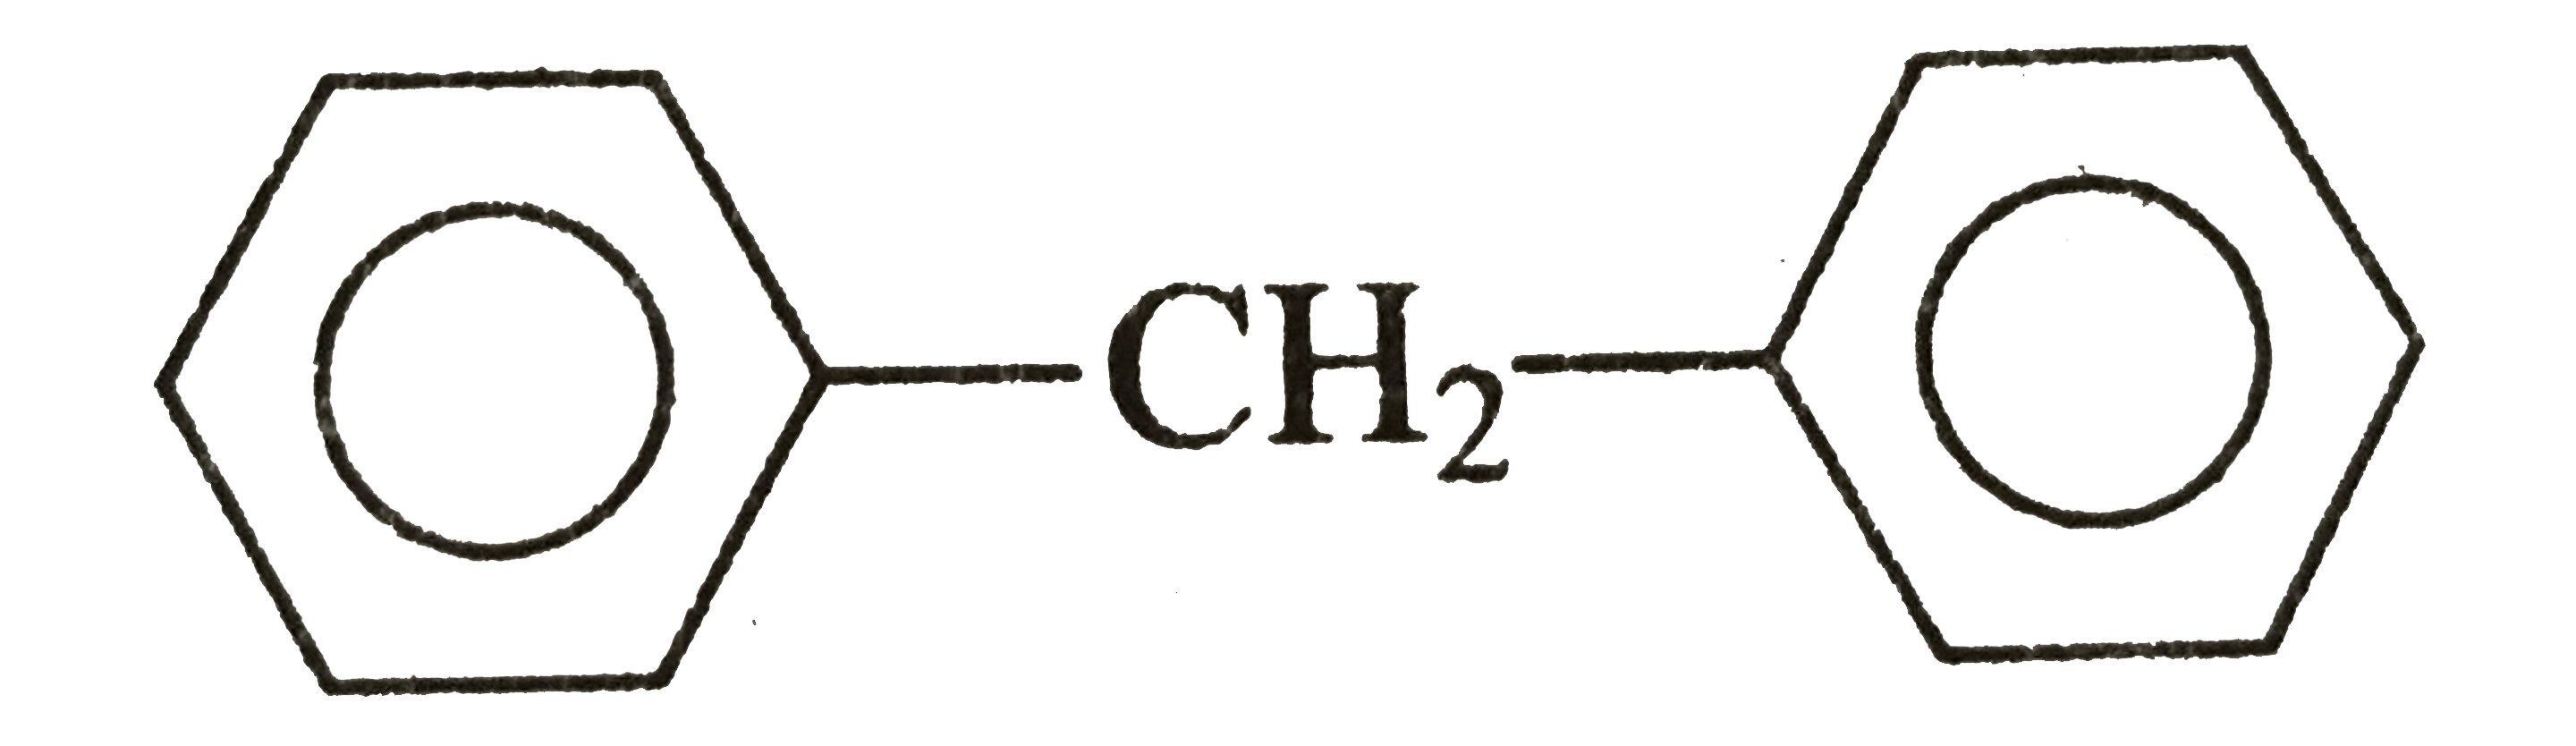 How many structural  isomers are possible when one of the hydrogen in compound given below is replaced by chlorine atom